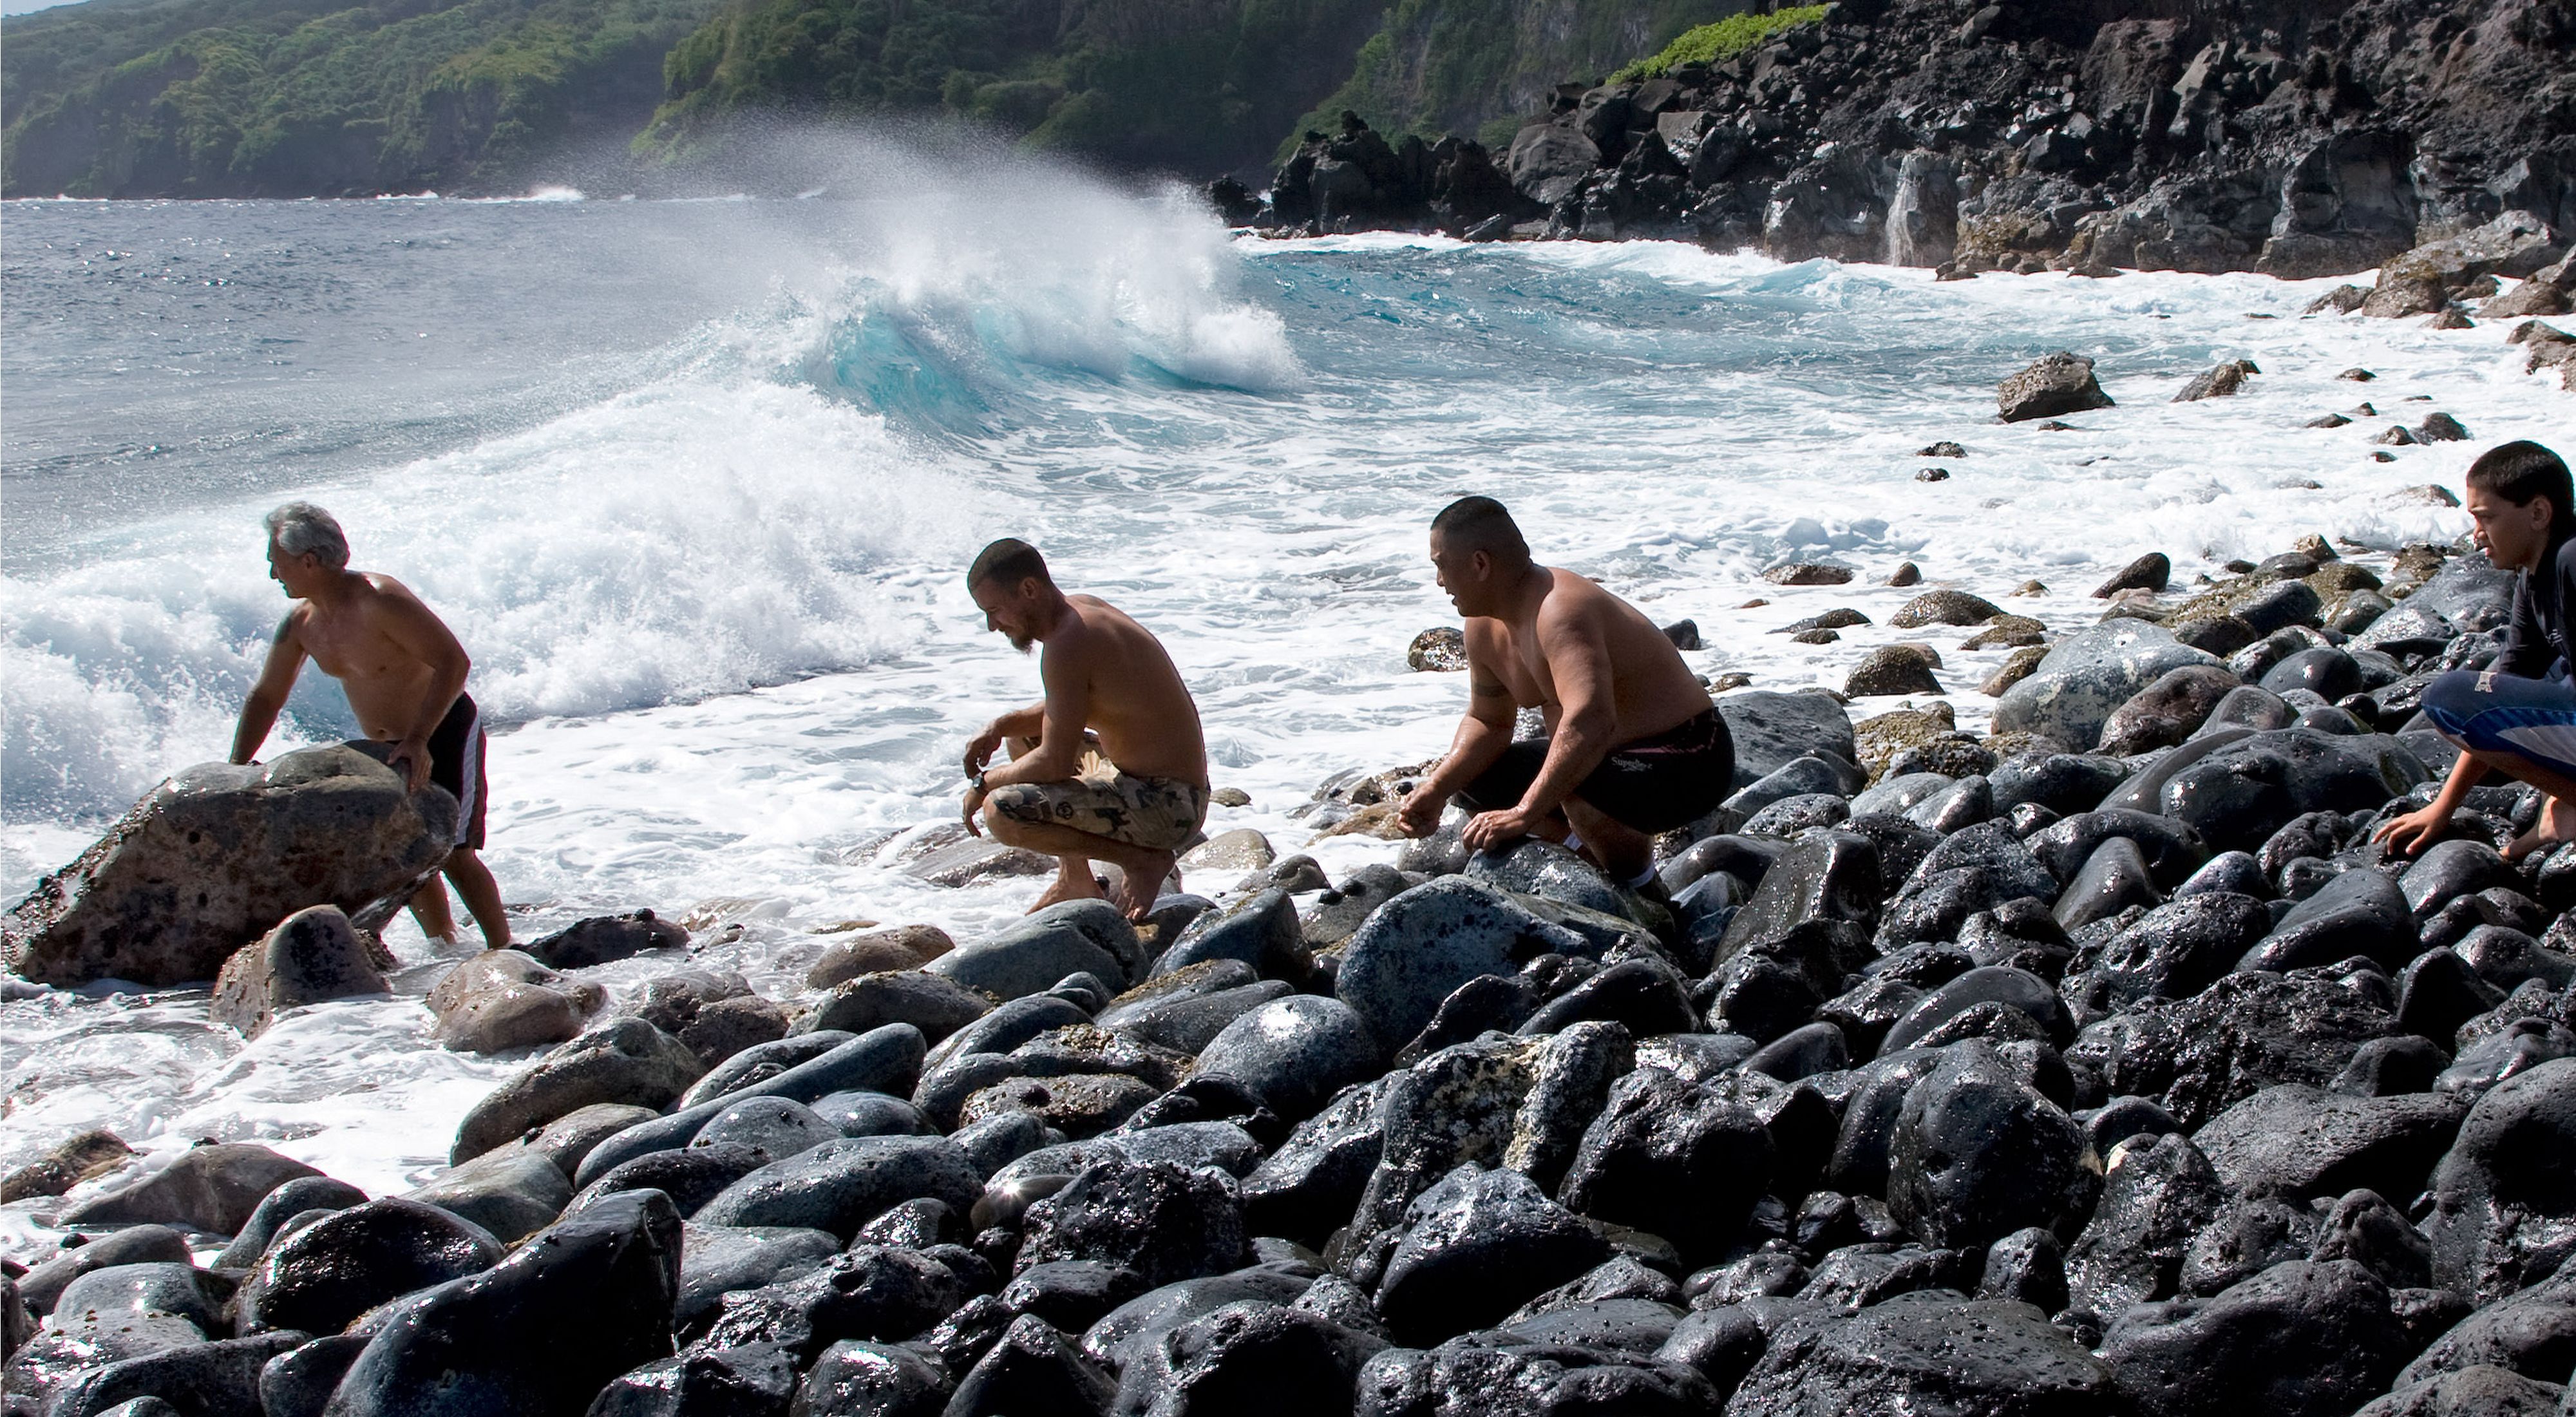 A group of four men crouch together on a rocky ocean coast as the surf crashes around them.